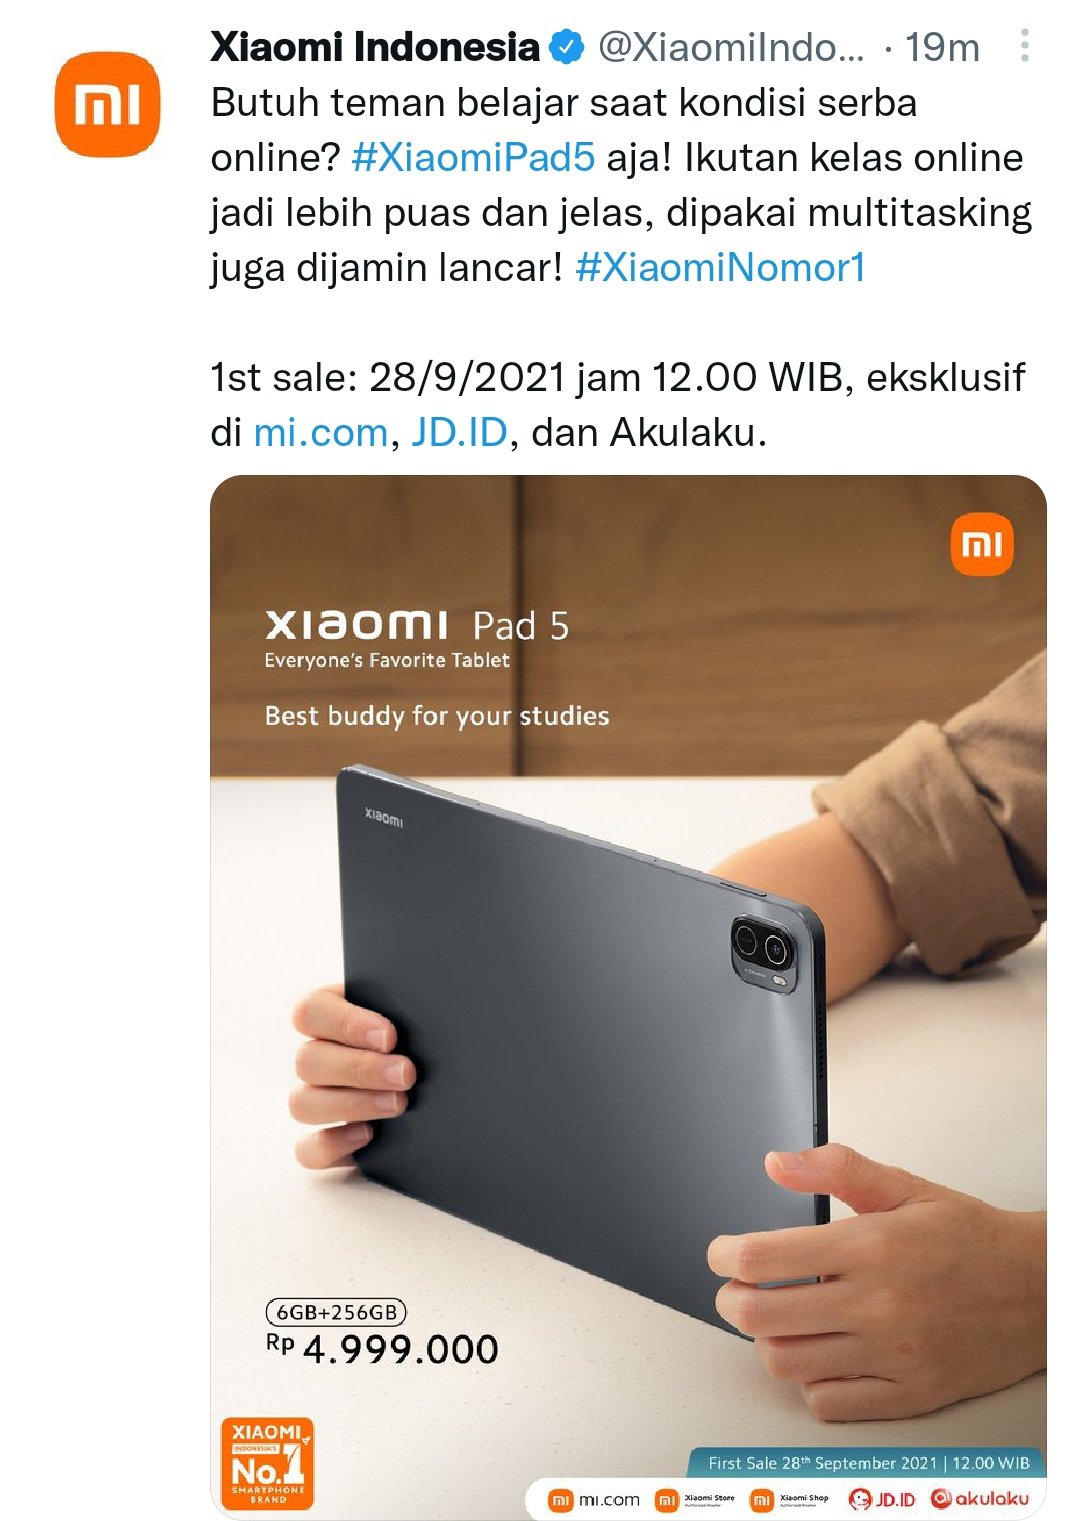 Xiaomi Pad 5 6GB+256GB variant launched in Indonesia for Rp